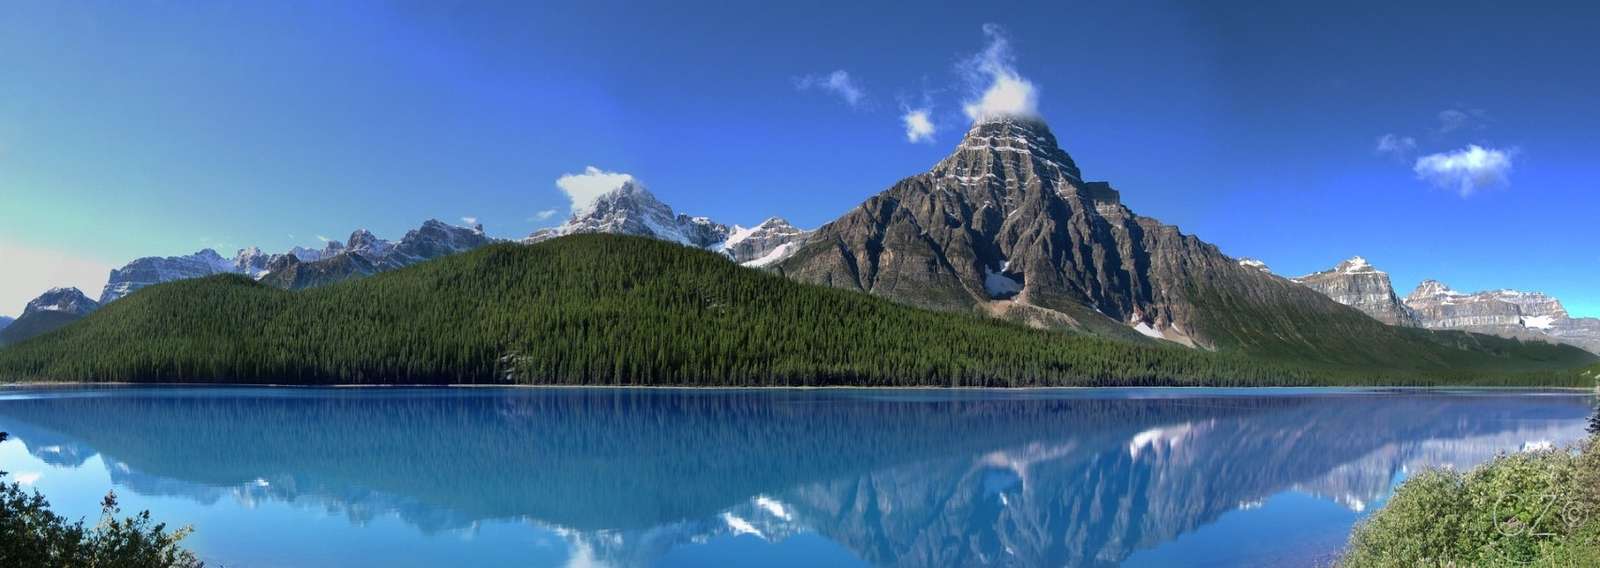 Canada, Rocky mountains, British Columbia online puzzle